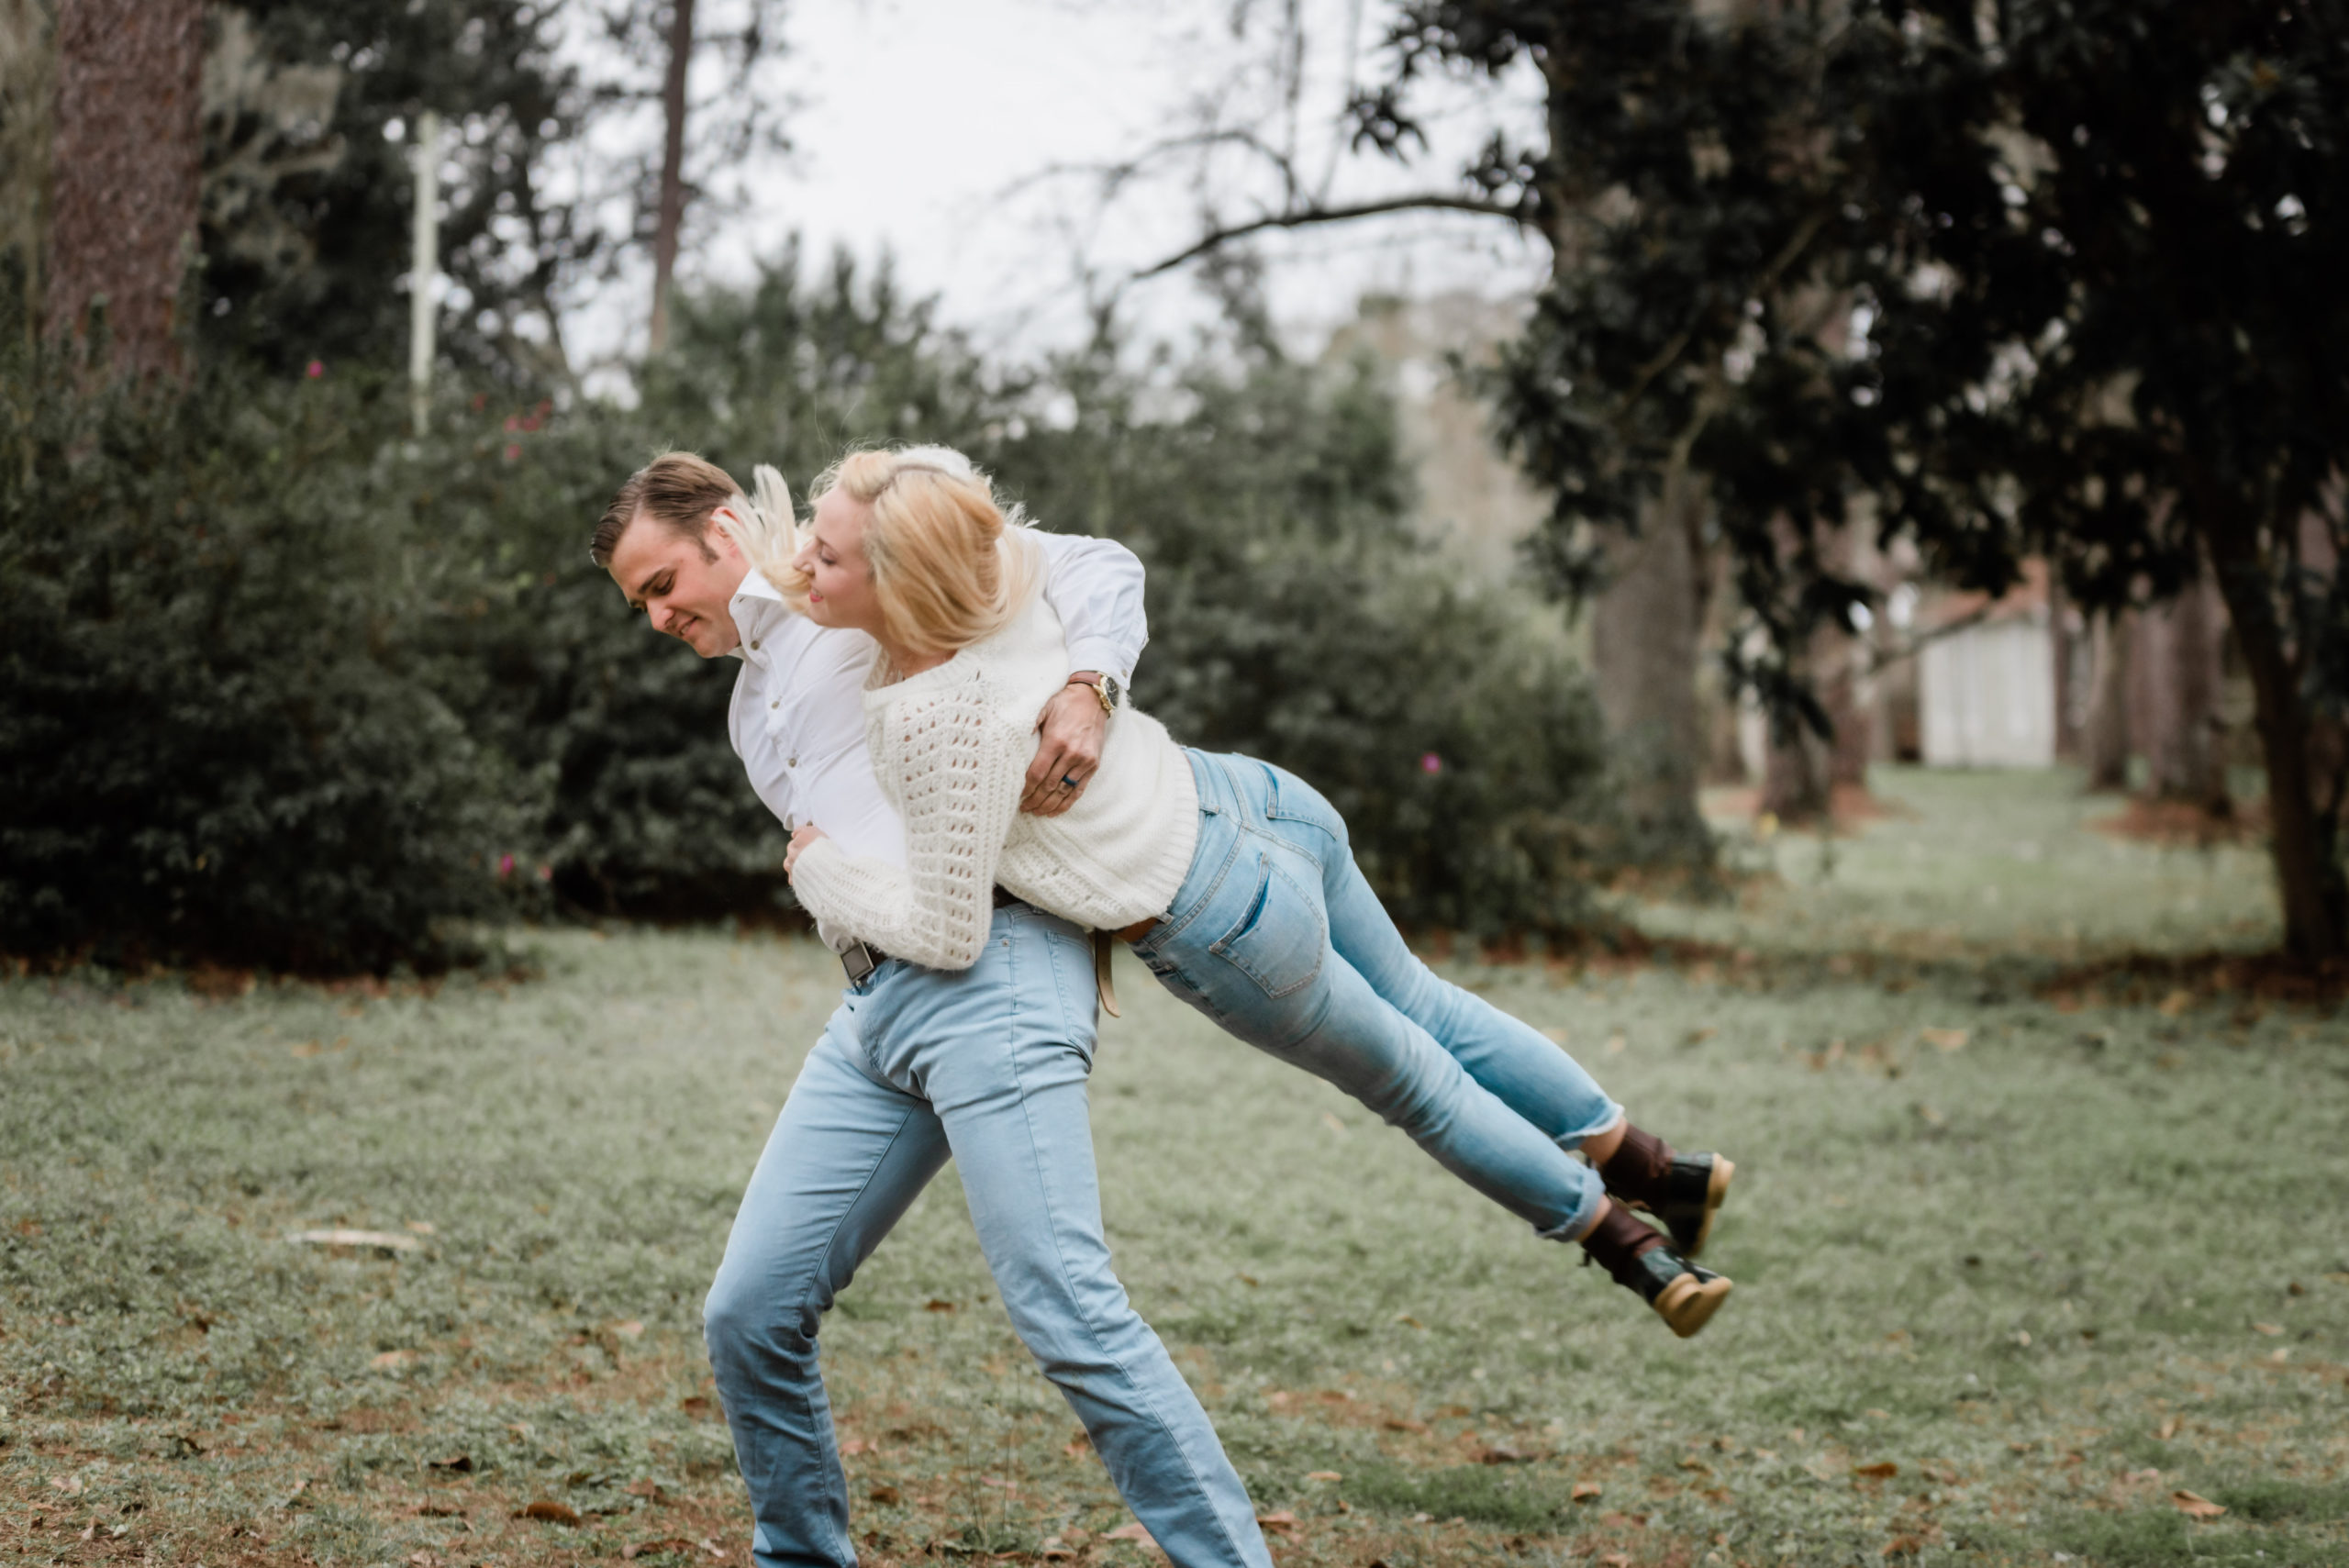 fun couples engagement photos at heritage park and gardens in live oak Florida by Black tie and co